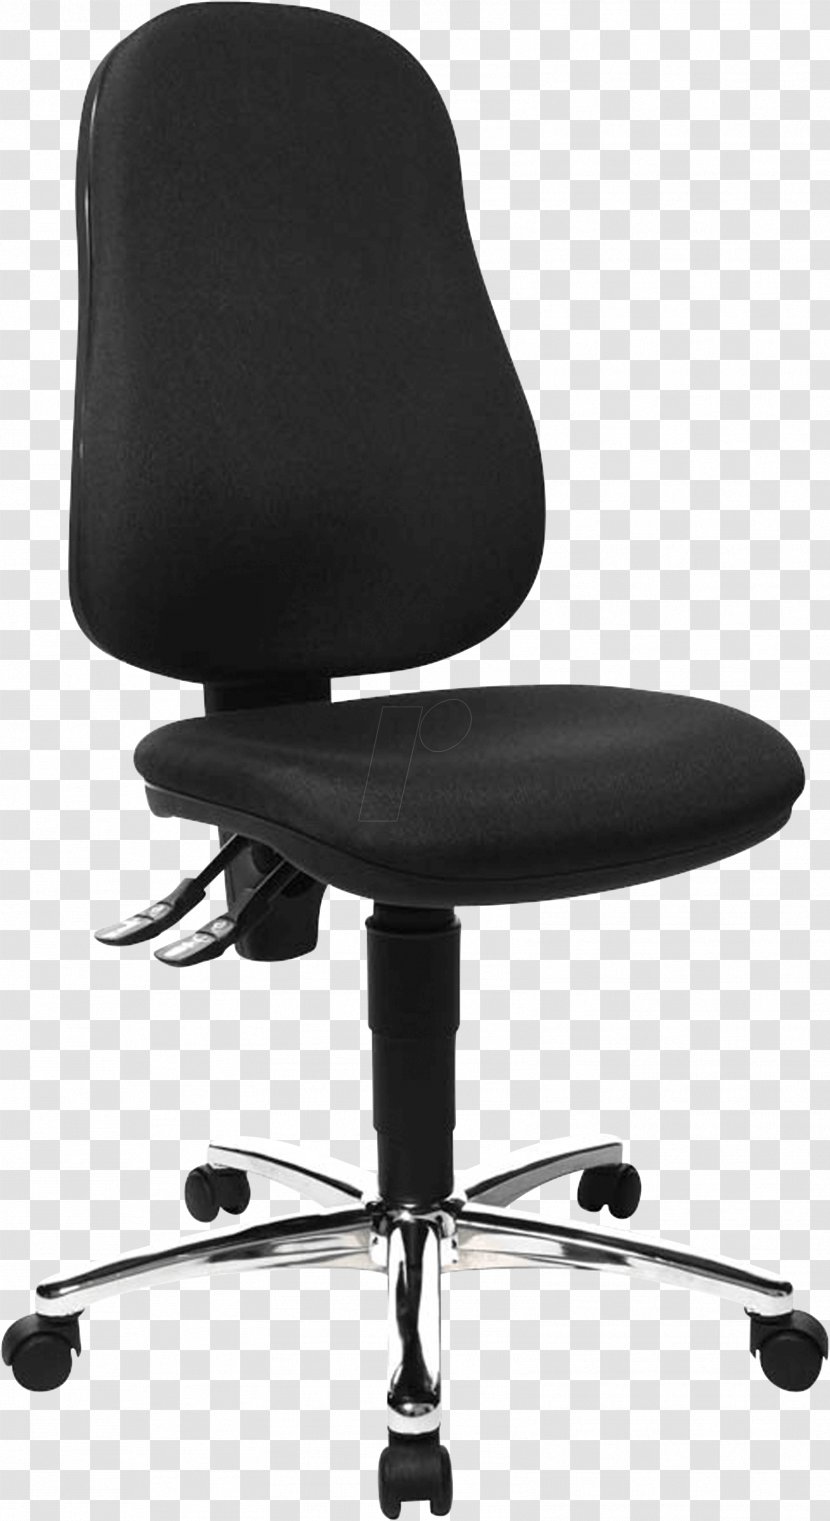 Office & Desk Chairs Furniture Table - Seat - Chair Transparent PNG